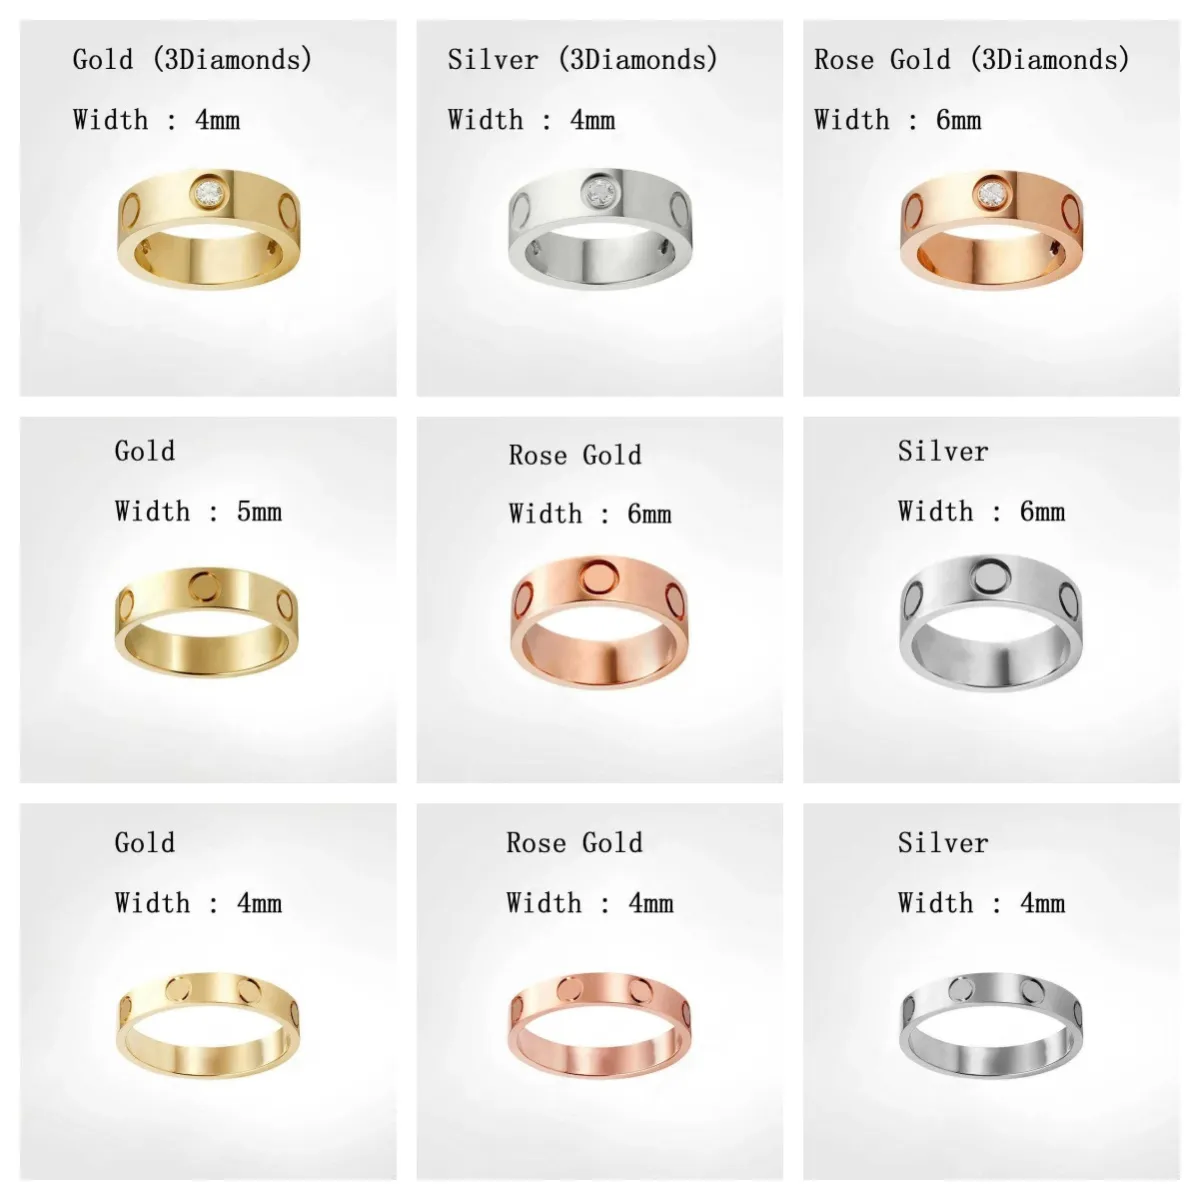 Jewelry Designer Love Ring Women's Designer Ring Desinger Jewelry 18k Gold plated titanium stainless steel ring Couple Set Jewelry Gift